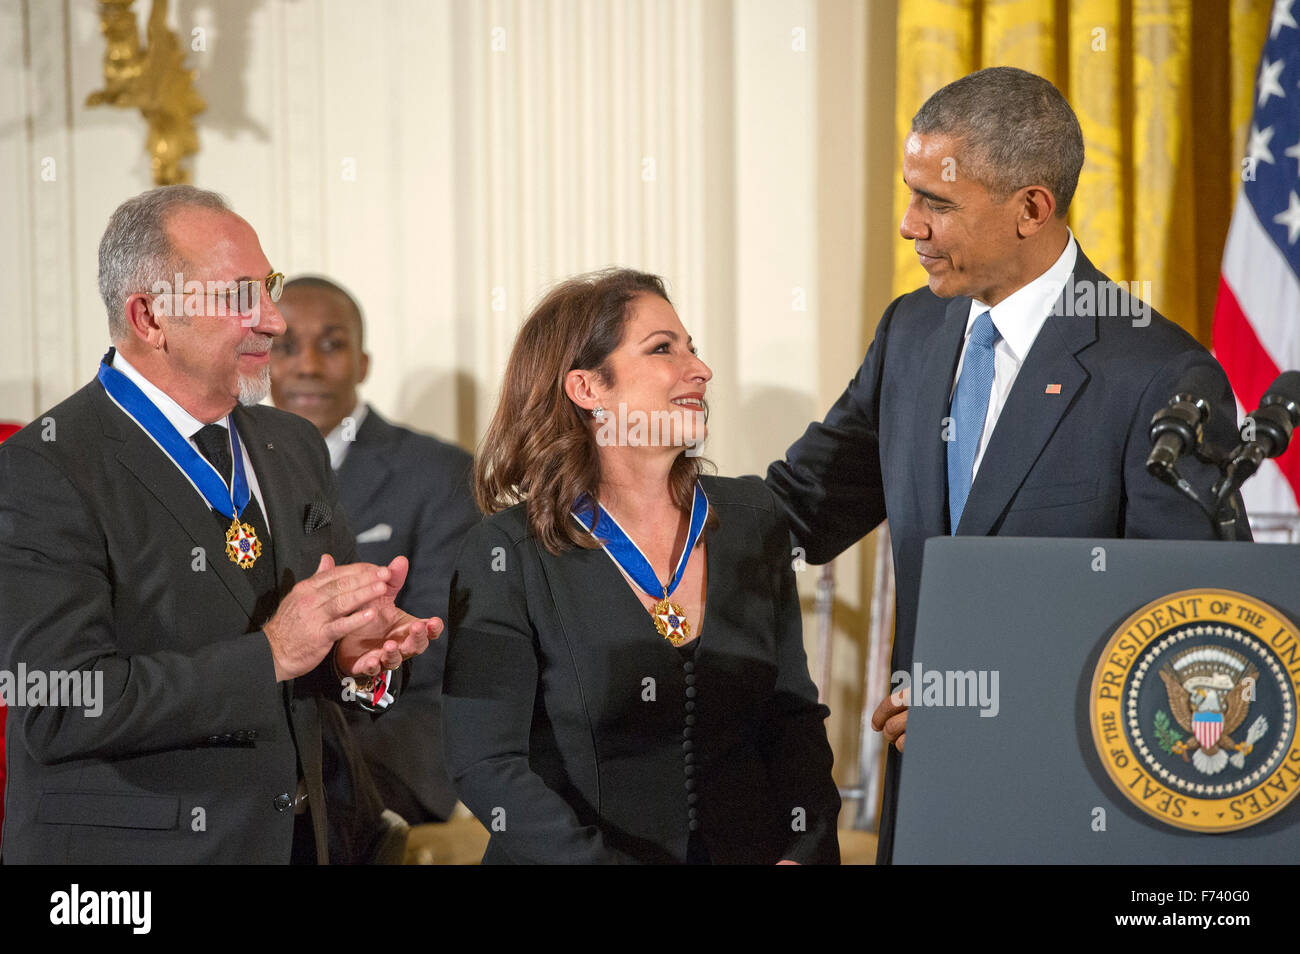 Gloria and Emilio Estefan receives the Presidential Medal of Freedom from United States President Barack Obama during a ceremony in the East Room of the White House in Washington, DC on Tuesday, November 24, 2015. The Medal is the highest US civilian honor, presented to individuals who have made especially meritorious contributions to the security or national interests of the US, to world peace, or to cultural or significant public or private endeavors. Photo: Ron Sachs/CNP/dpa - NO WIRE SERVICE - Stock Photo